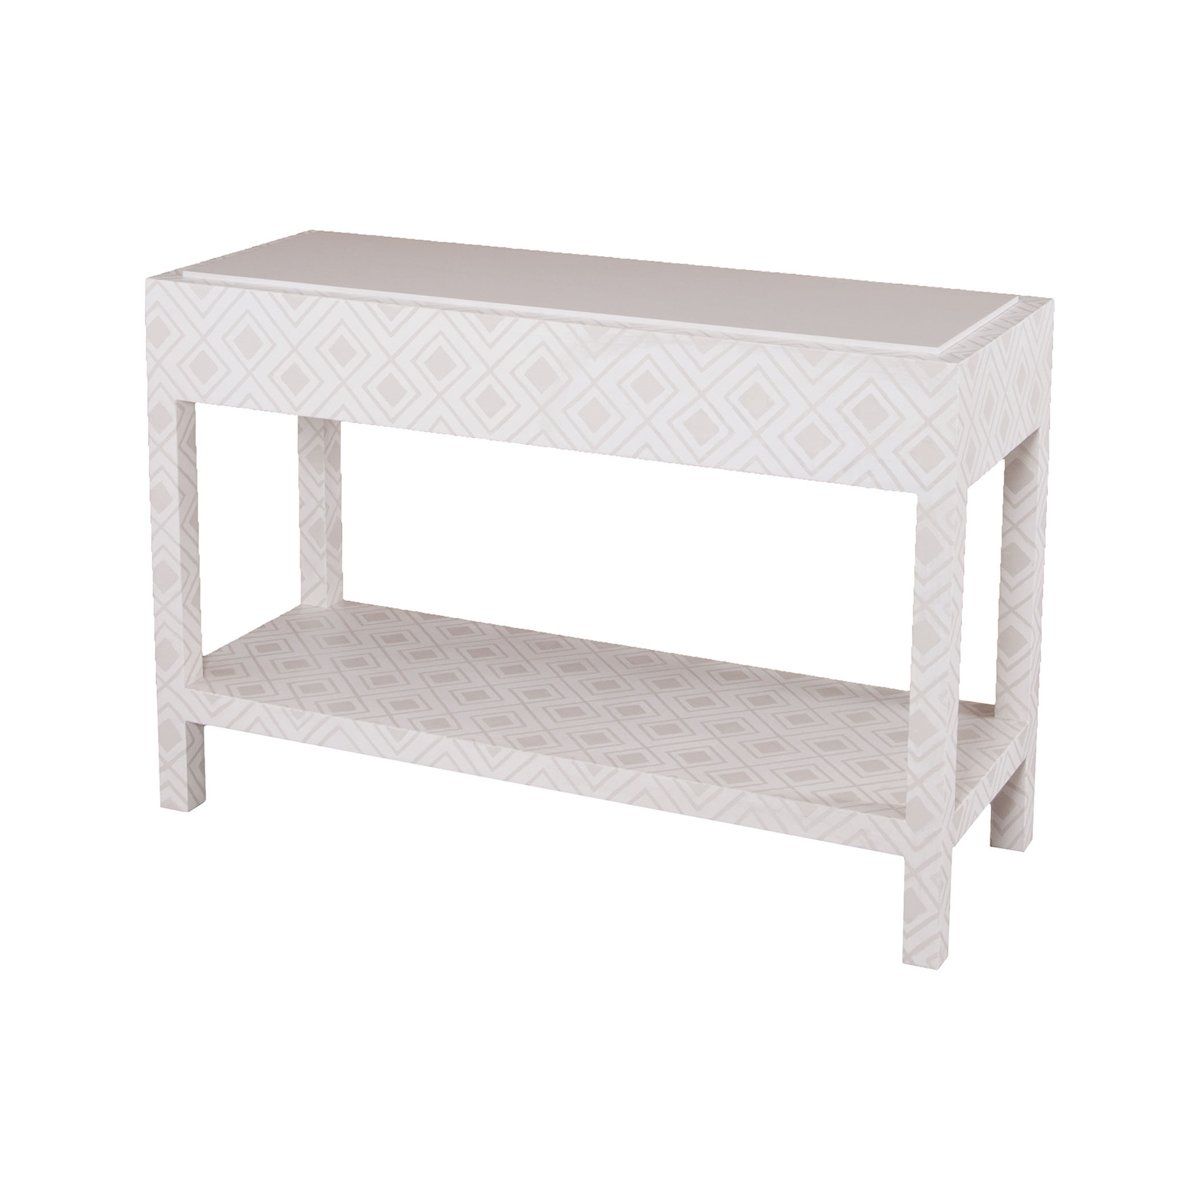 Kent Fabric Wrapped Console | Products In 2018 | Pinterest Within Parsons Concrete Top &amp; Brass Base 48x16 Console Tables (View 14 of 30)